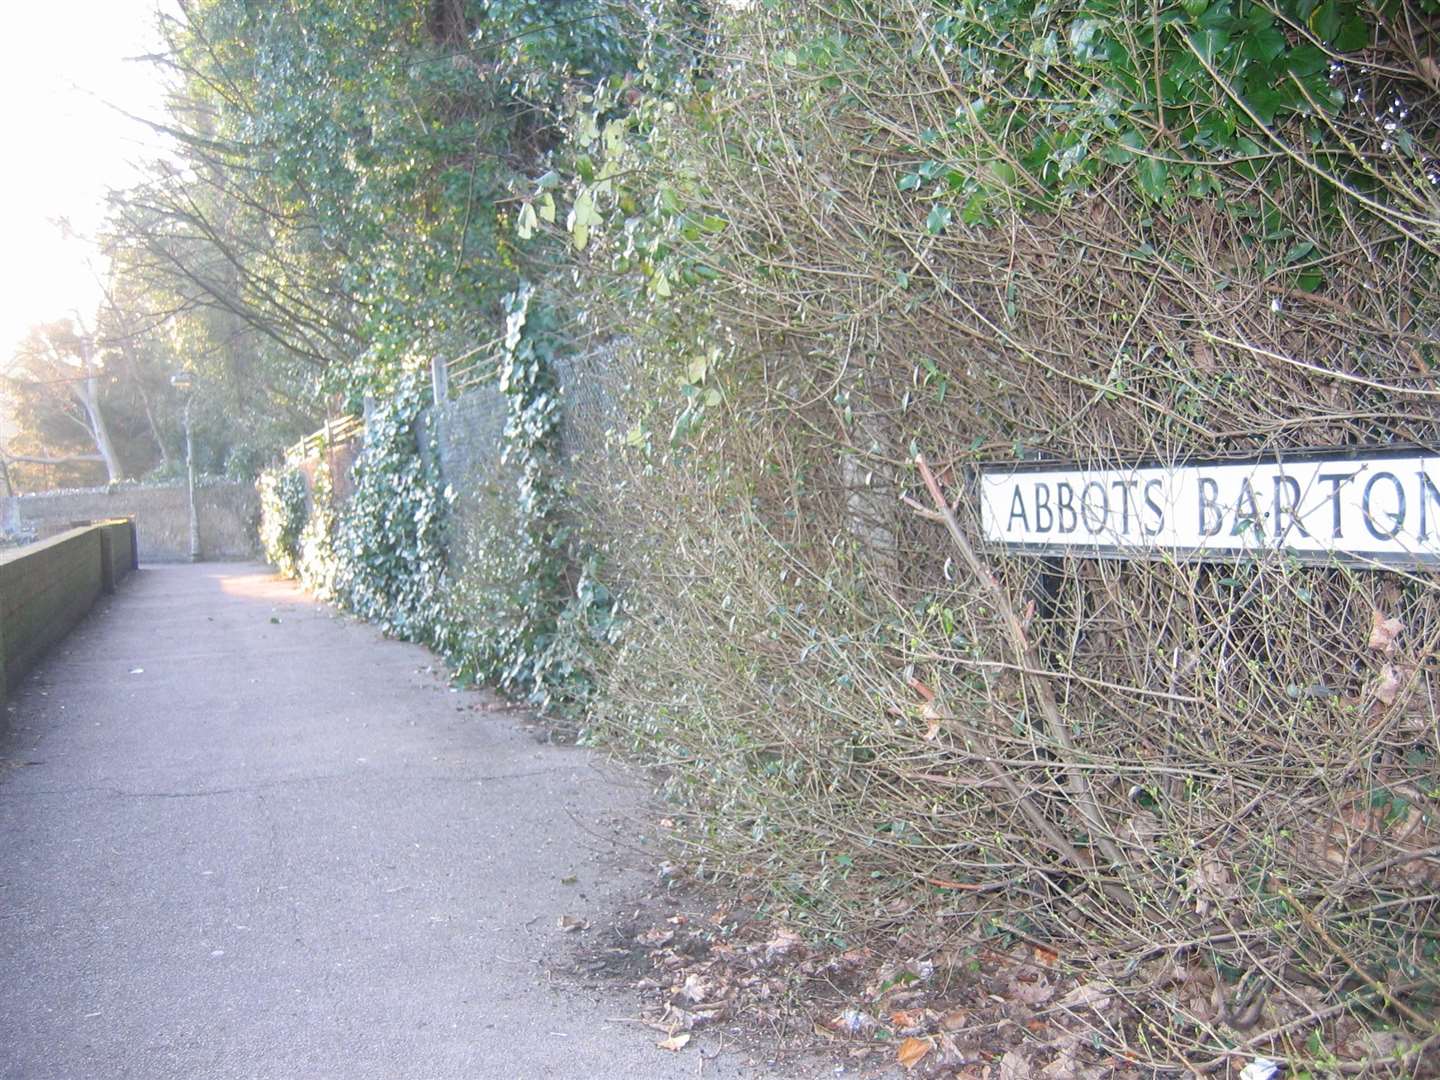 The incident took place in Abbots Barton Walk, near Old Dover Road